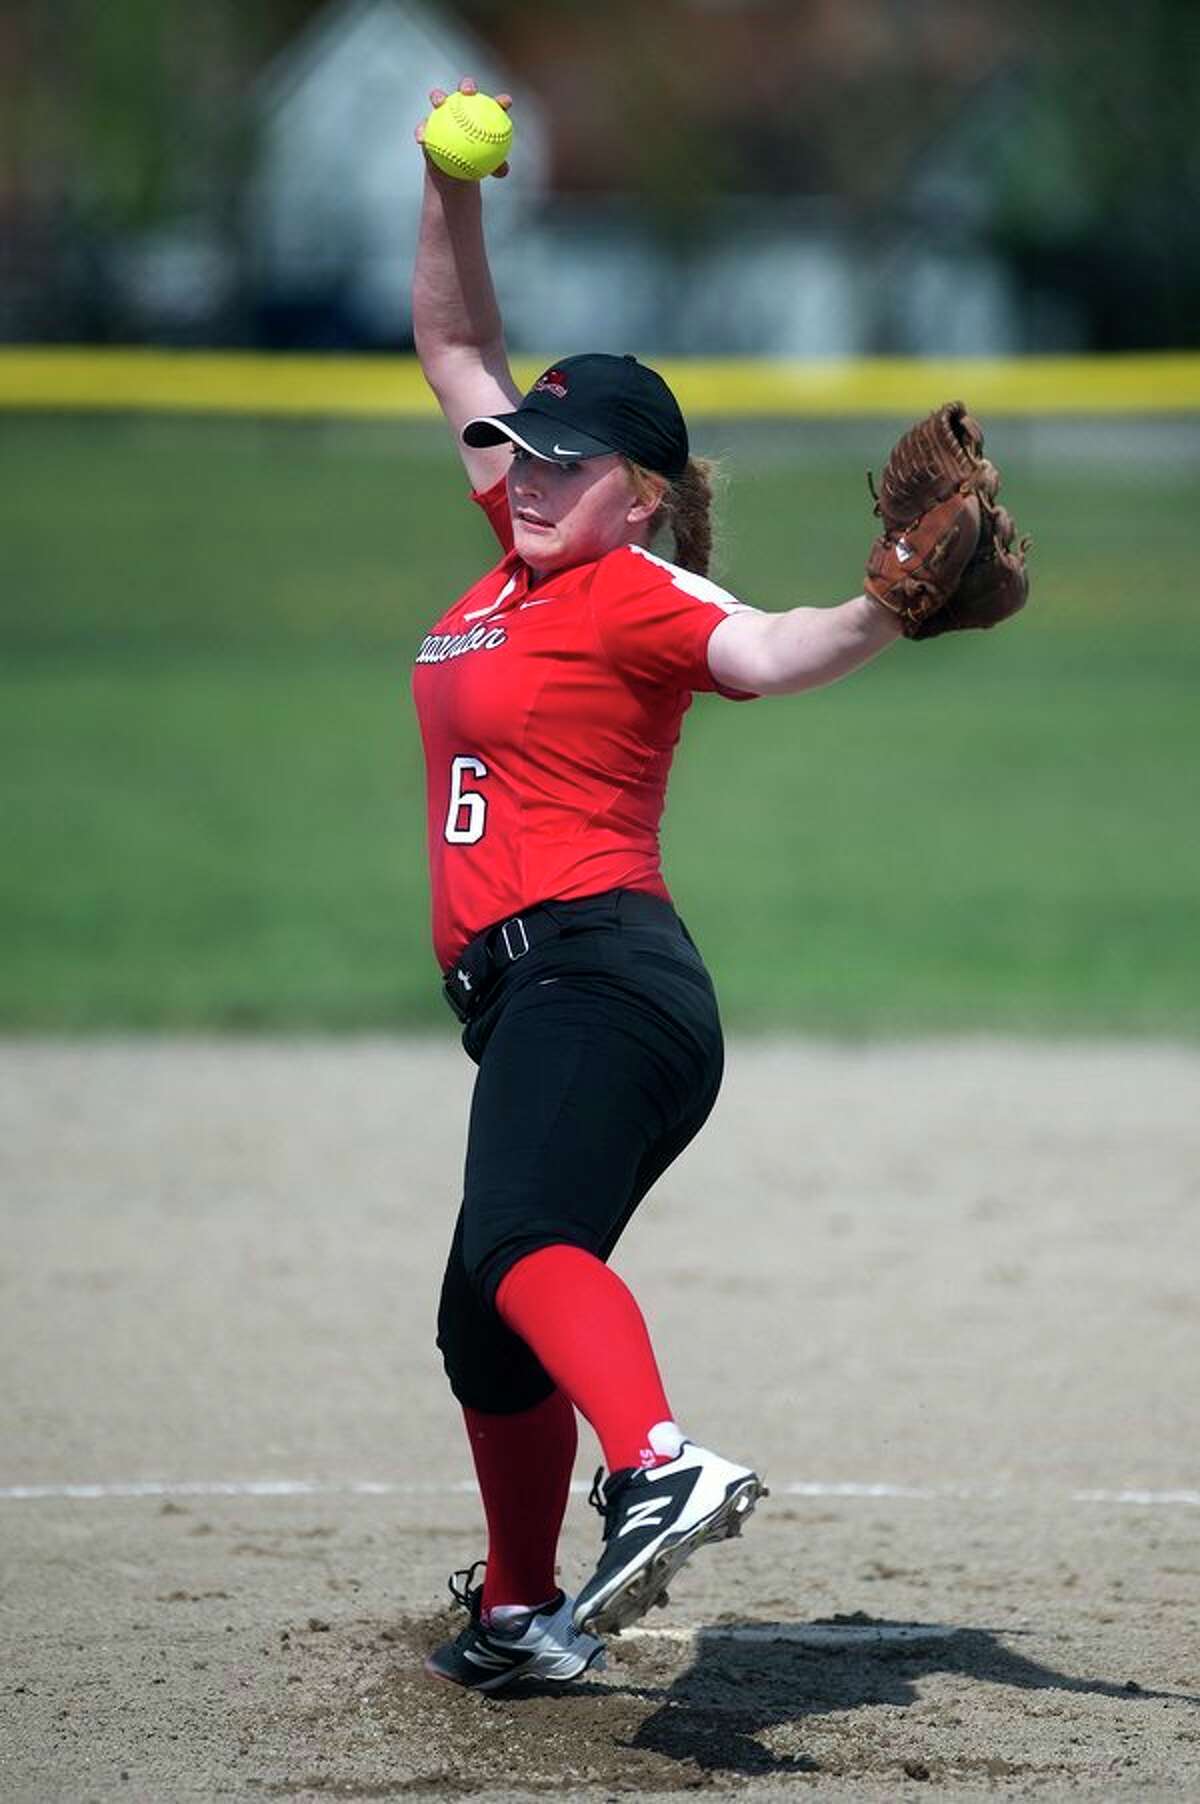 Beaverton's Faith Howe delivers a pitch during a game against Meridian last spring. (Daily News file photo)